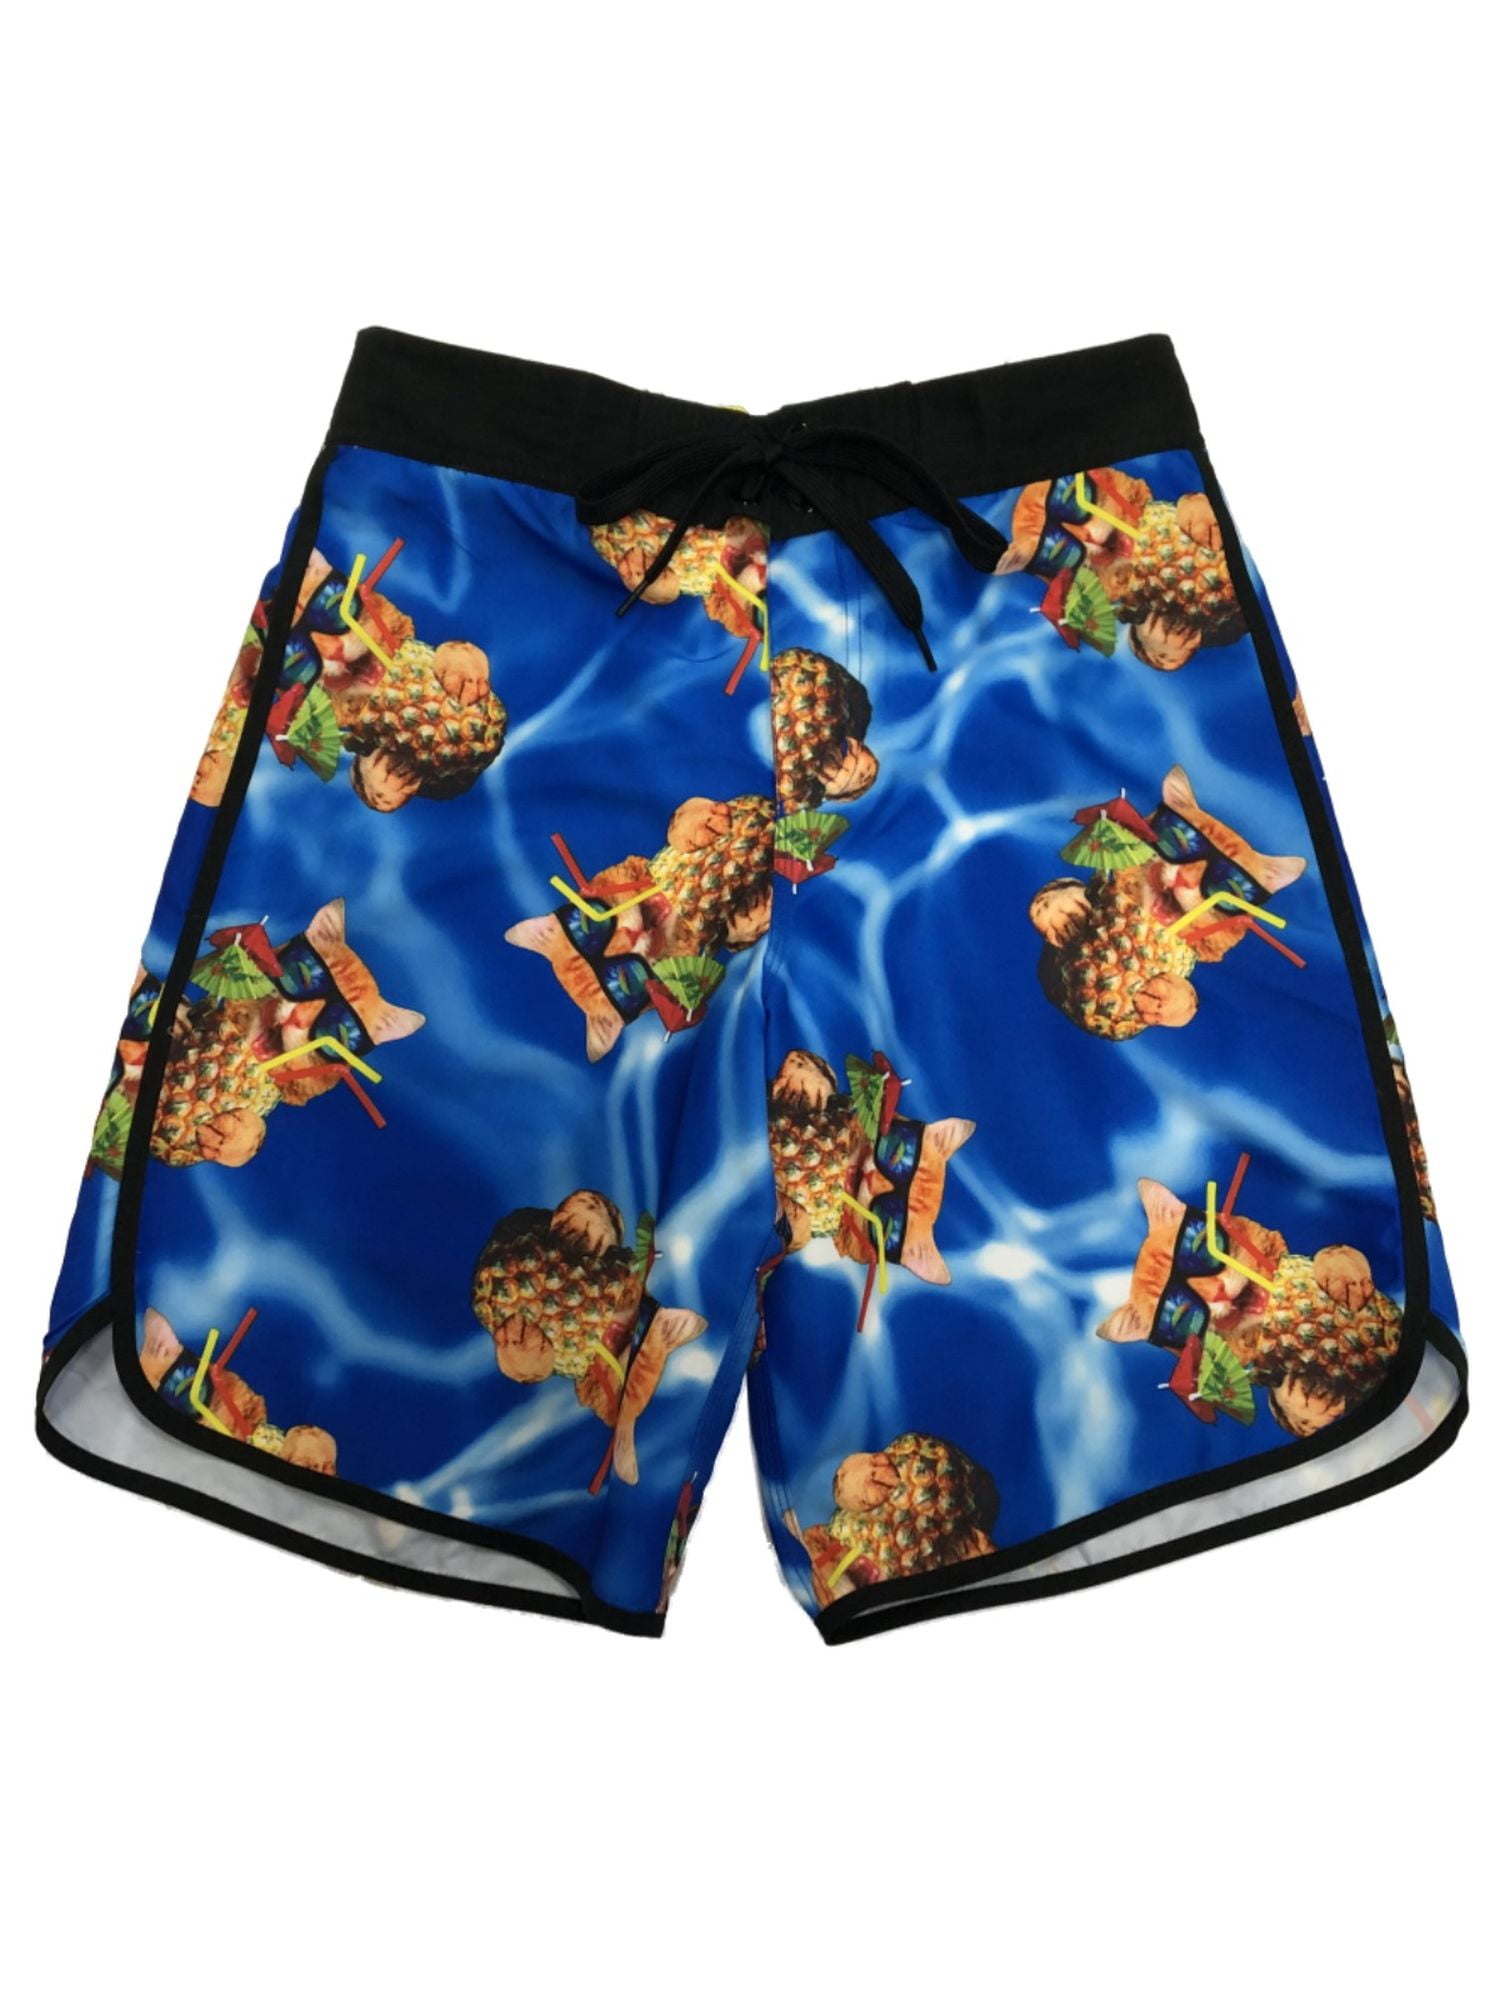 Swim Trunks Hello Kitty Drinking Quick Dry Beach Board Shorts Bathing Suit with Side Pockets for Teen Boys 